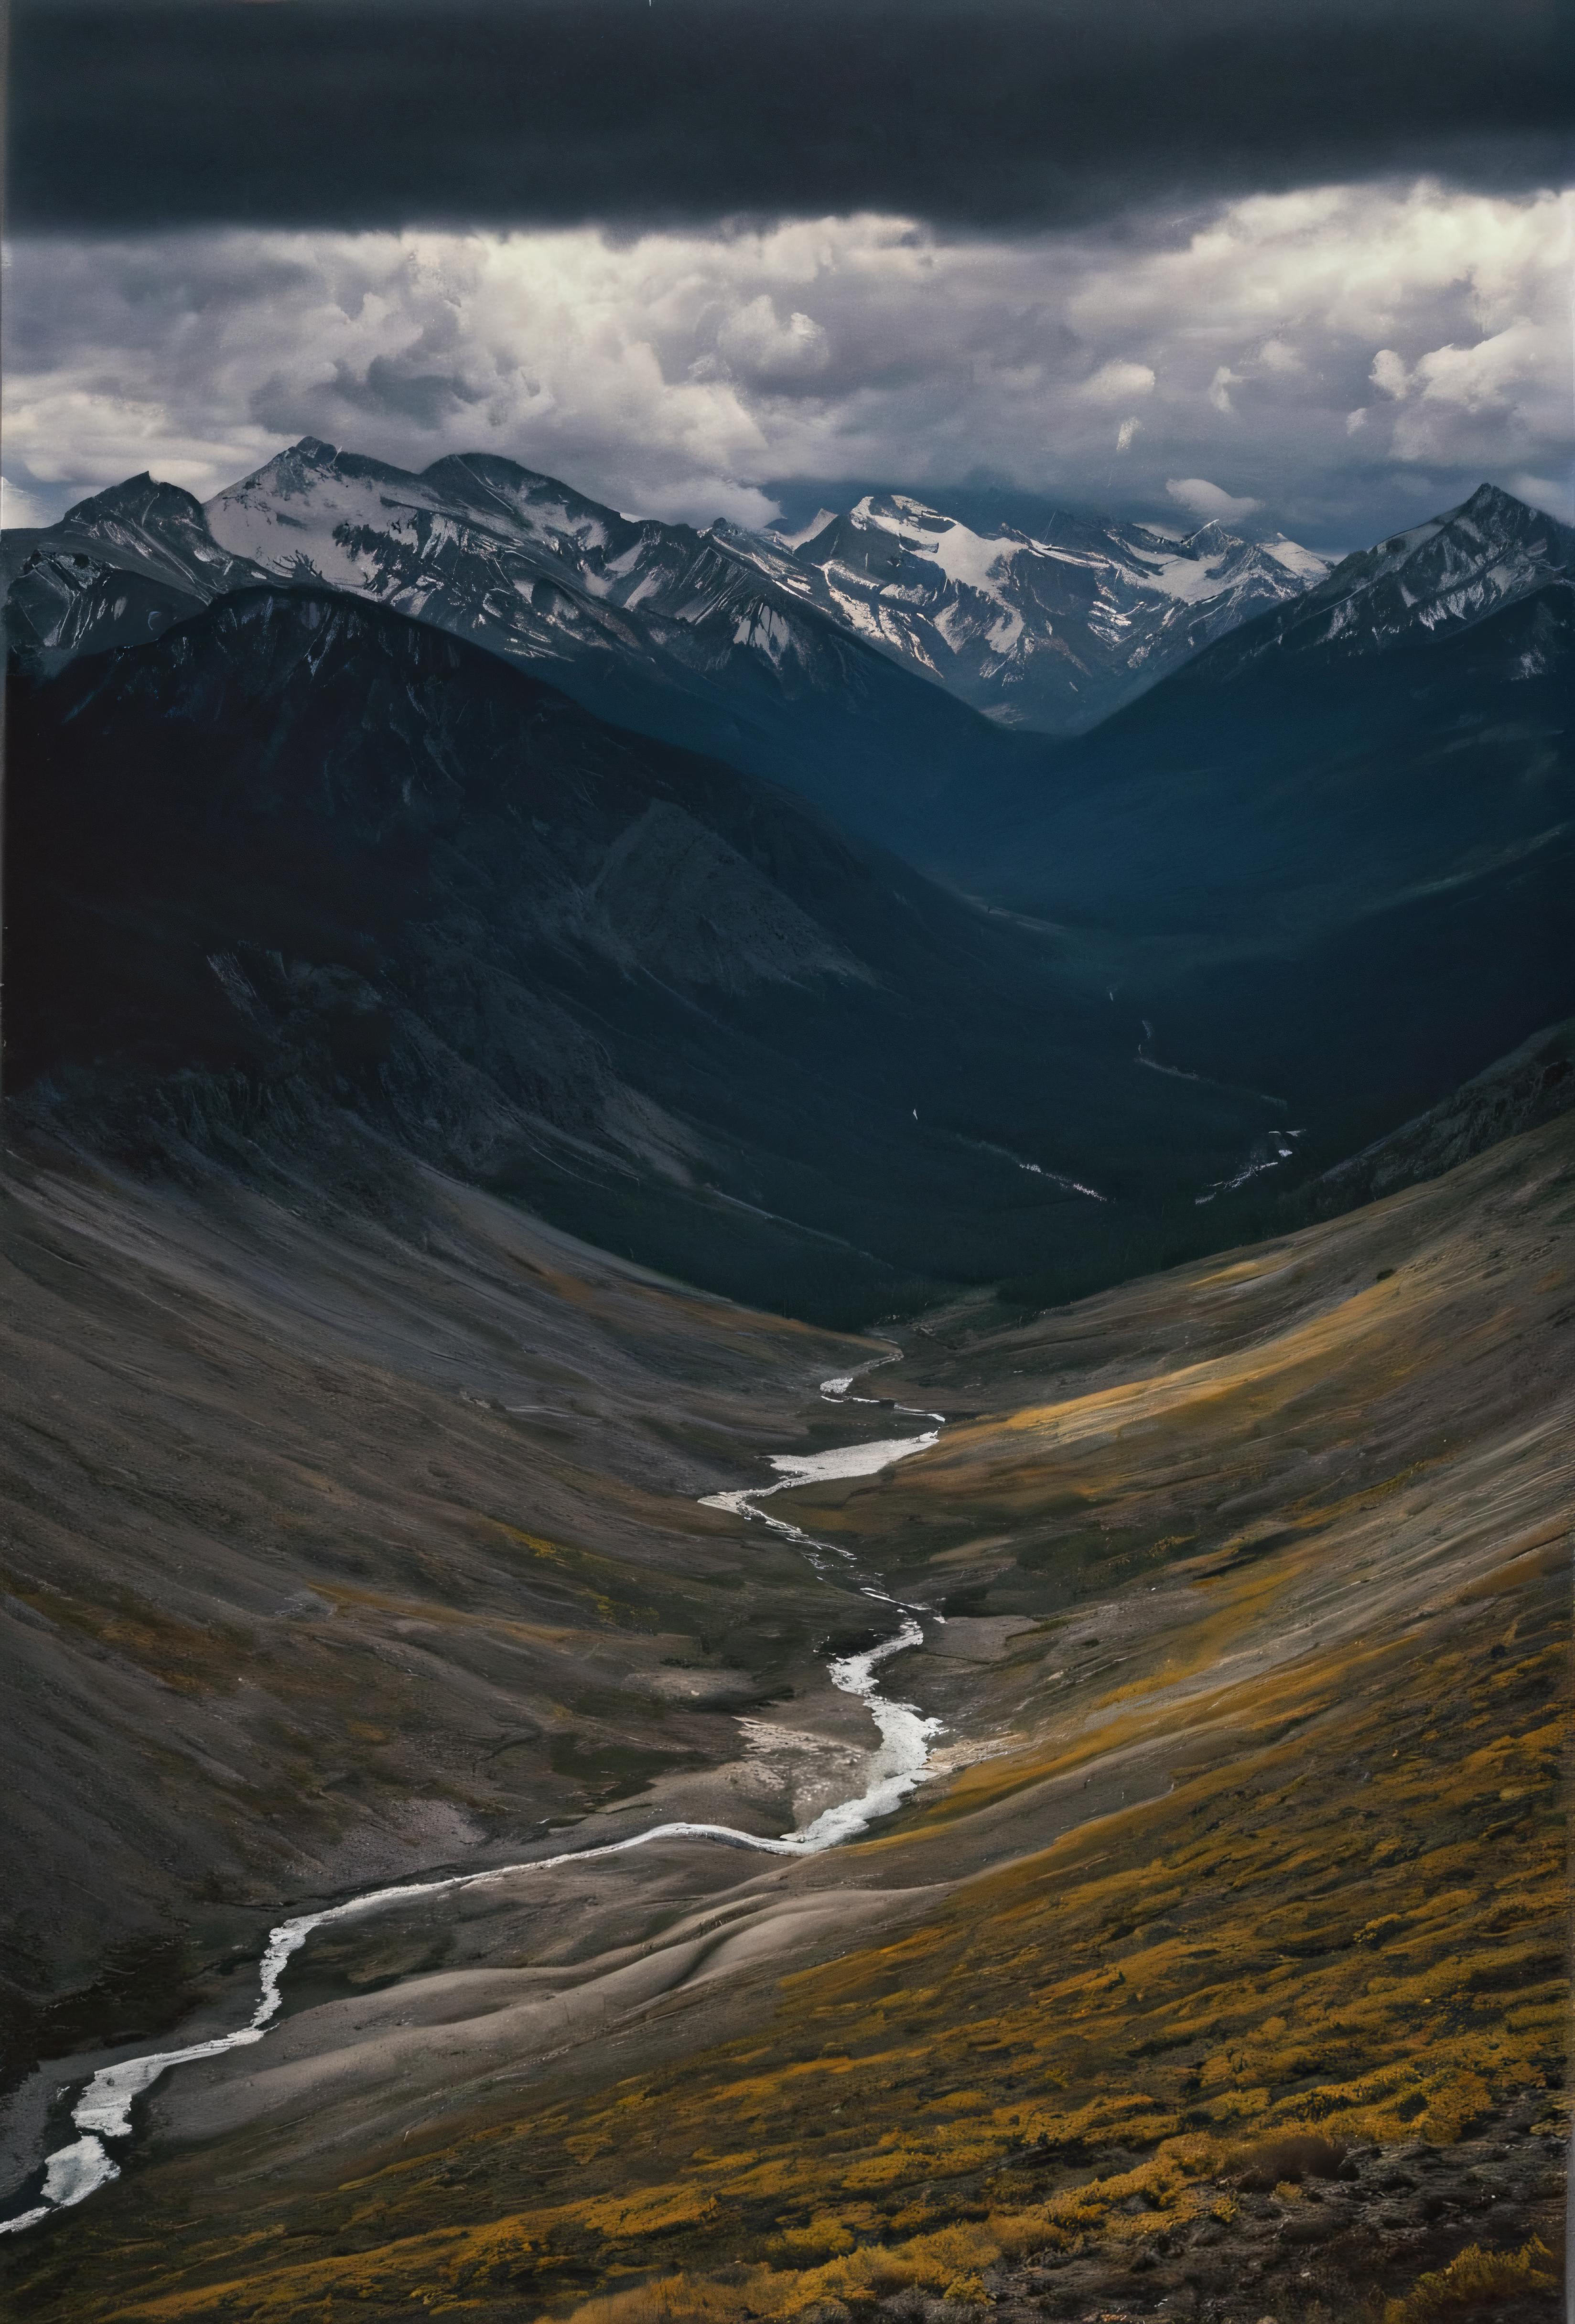 A beautiful aerial view of a valley with a river flowing through it, surrounded by majestic snow-capped mountains.